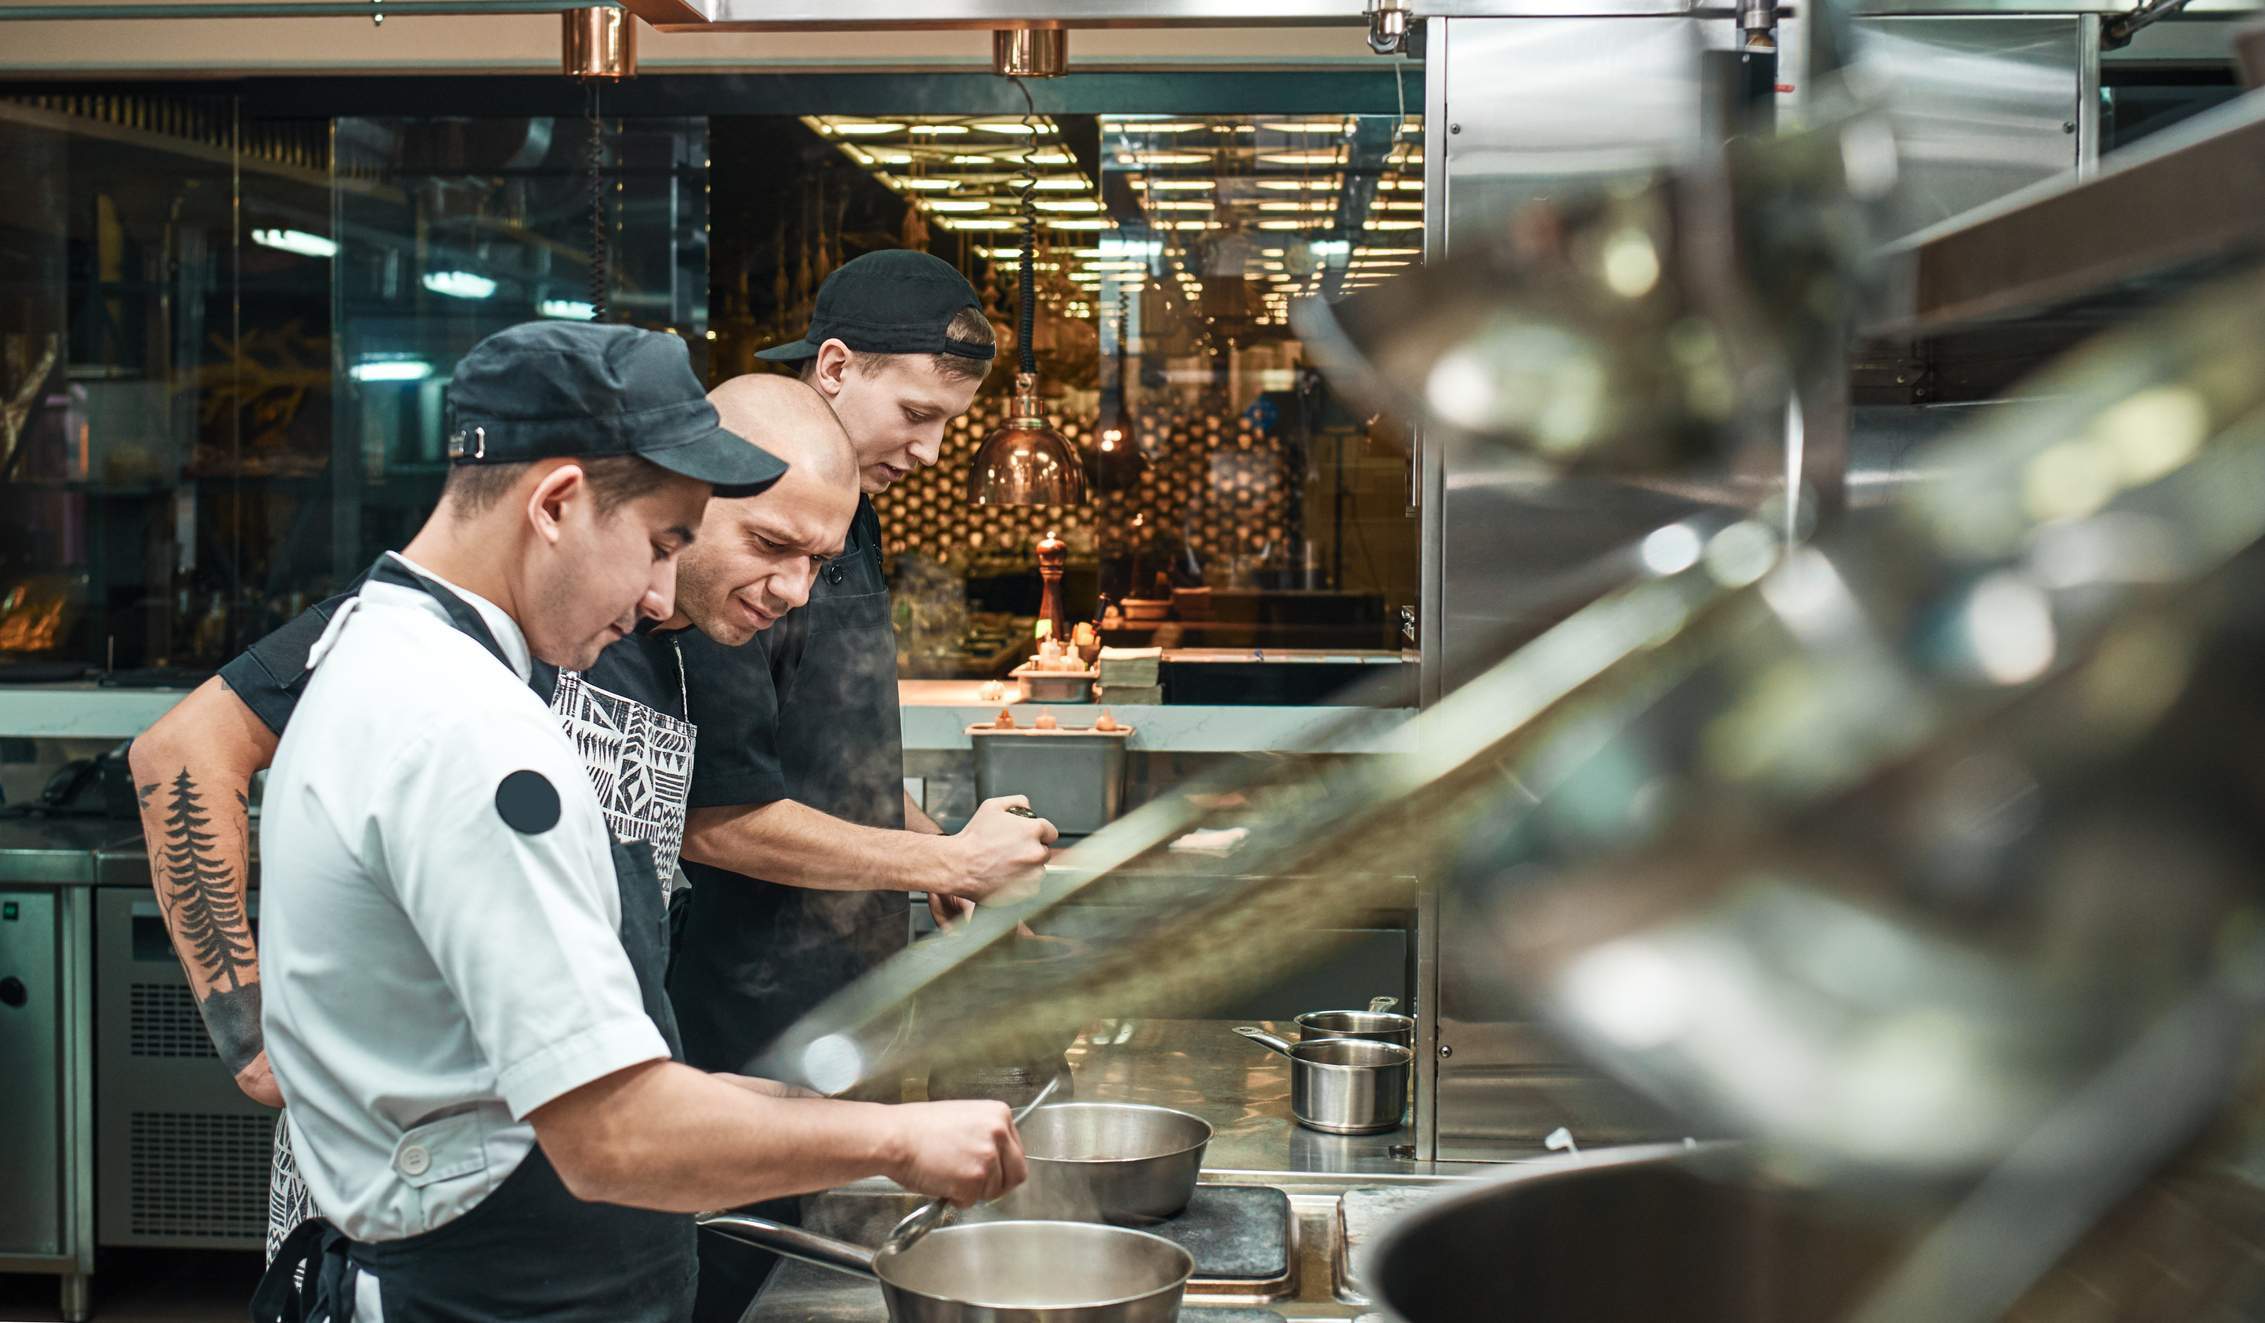 This image shows a restaurant kitchen setting where 3 restaurant staff are working behind the scene